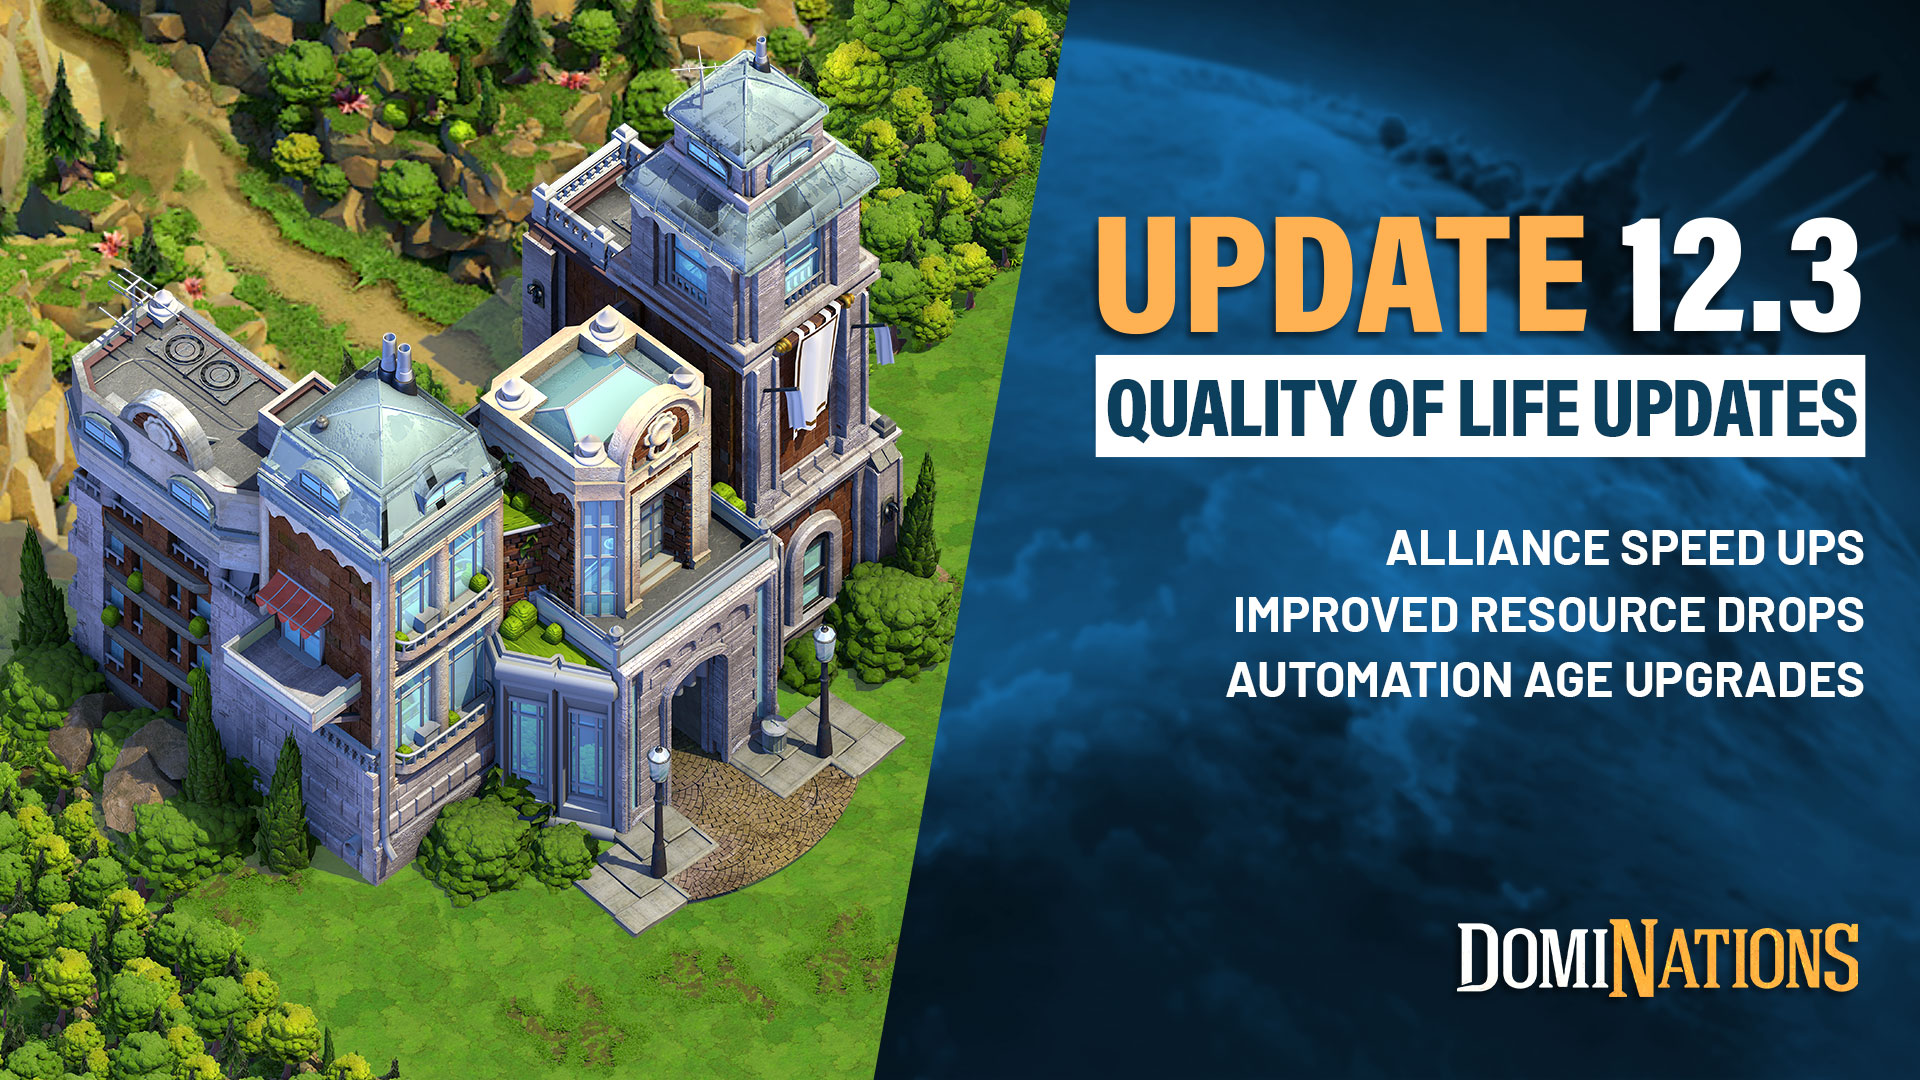 DomiNations Update 12.3 - Quality of Life Updates